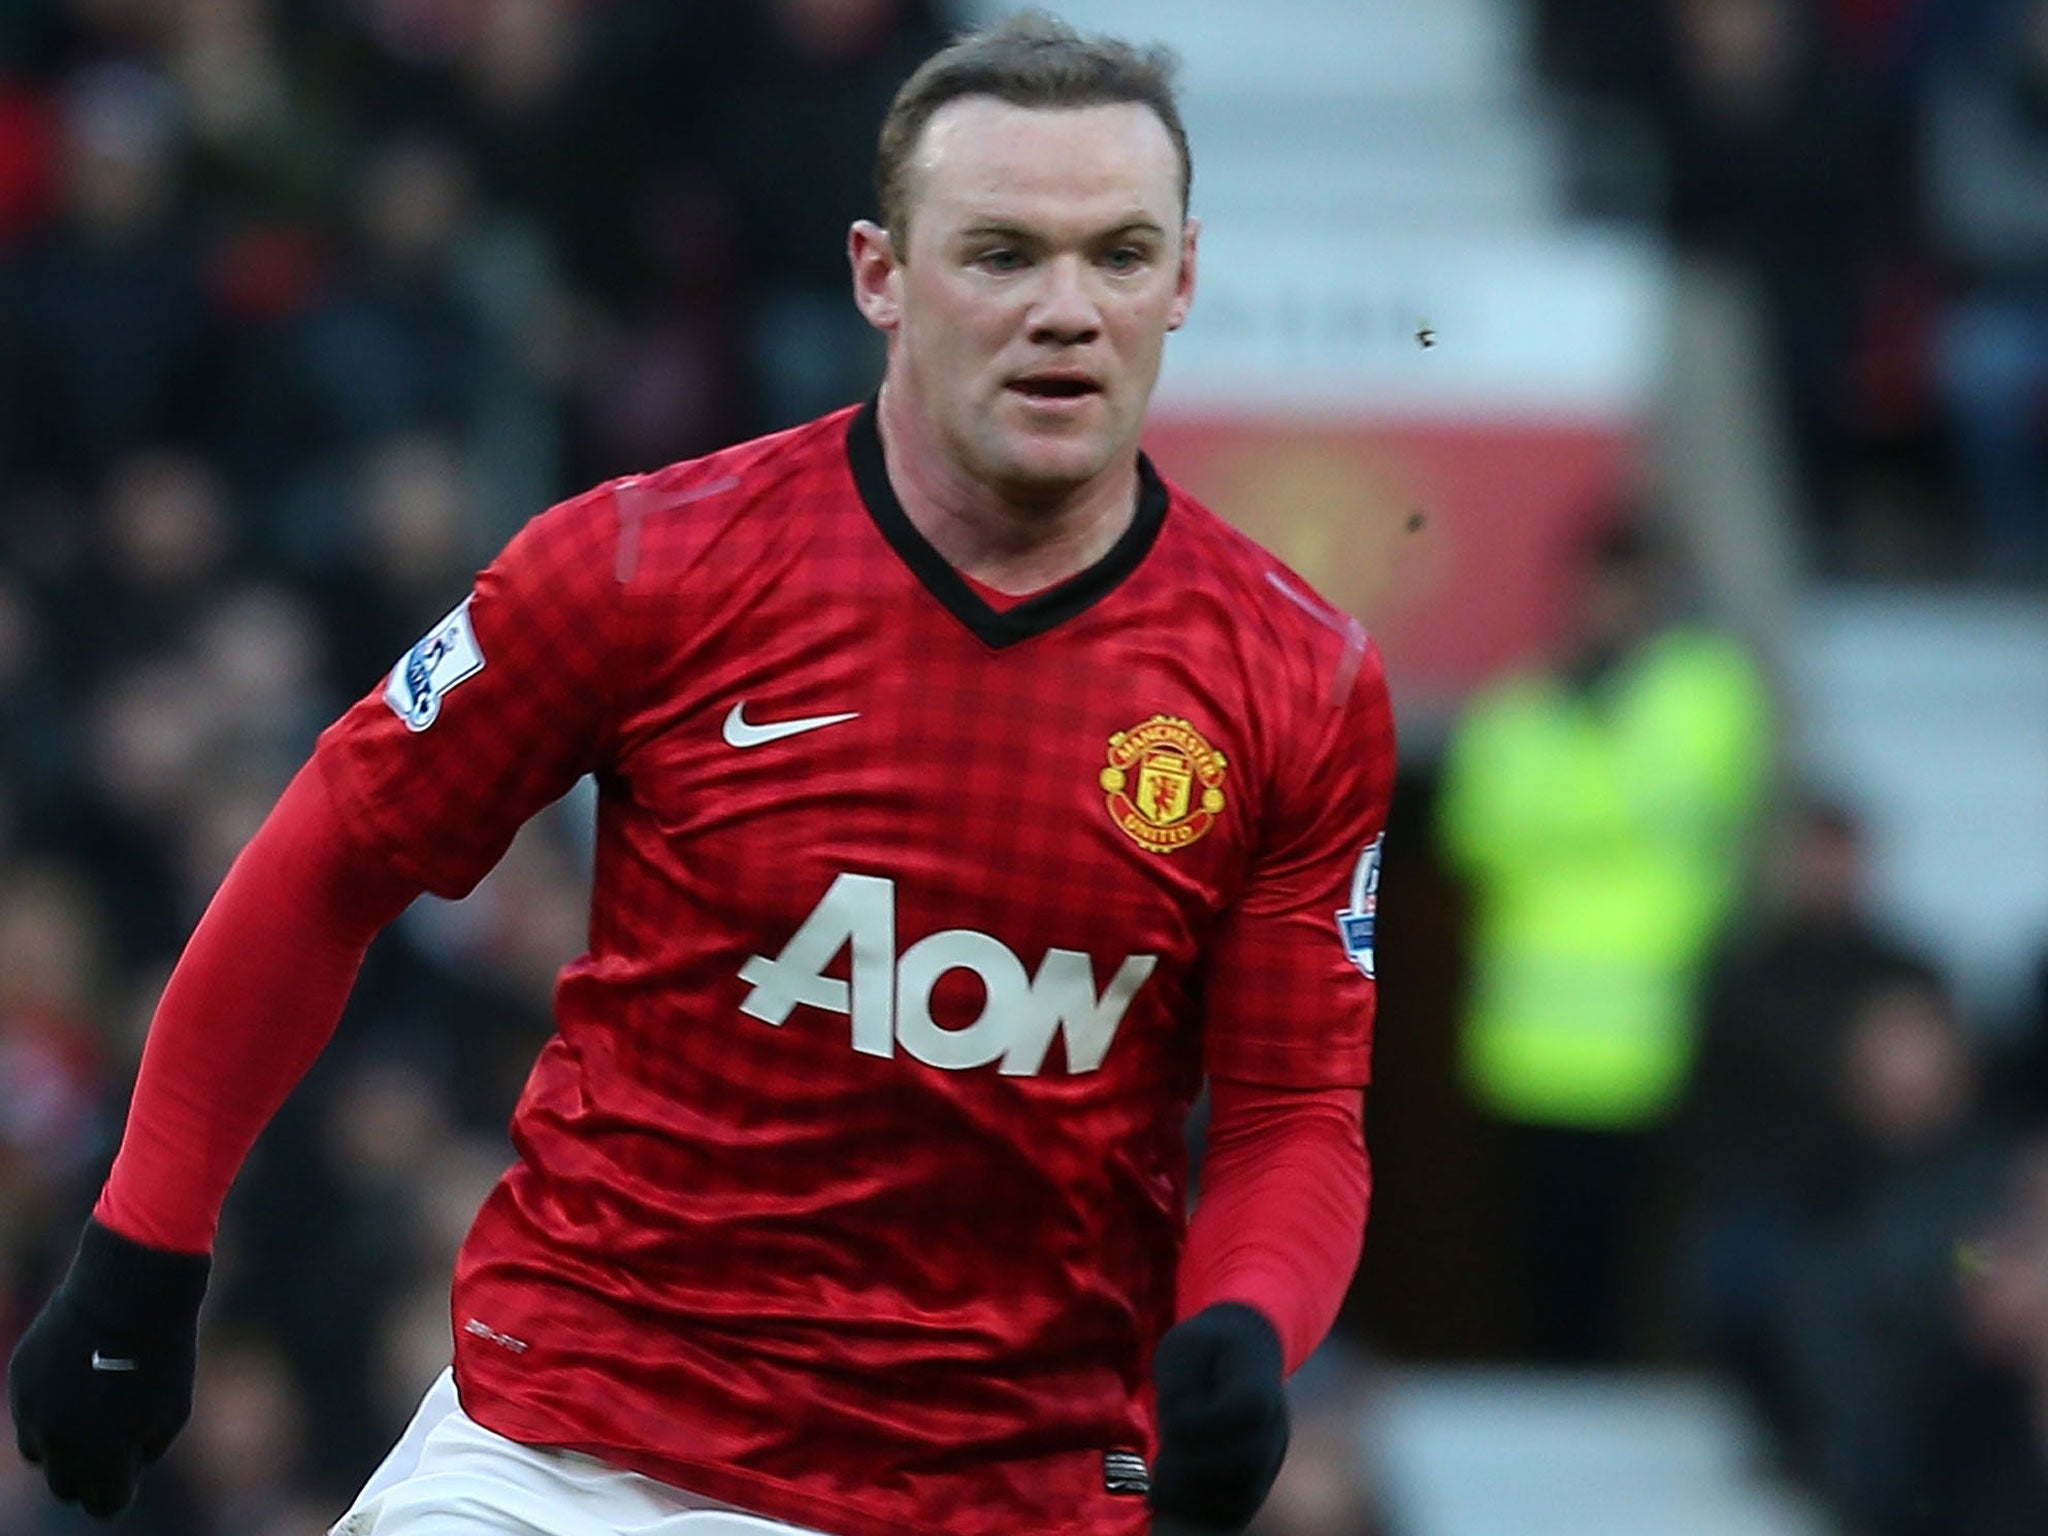 Wayne Rooney was said to be ‘angry and confused’ this week